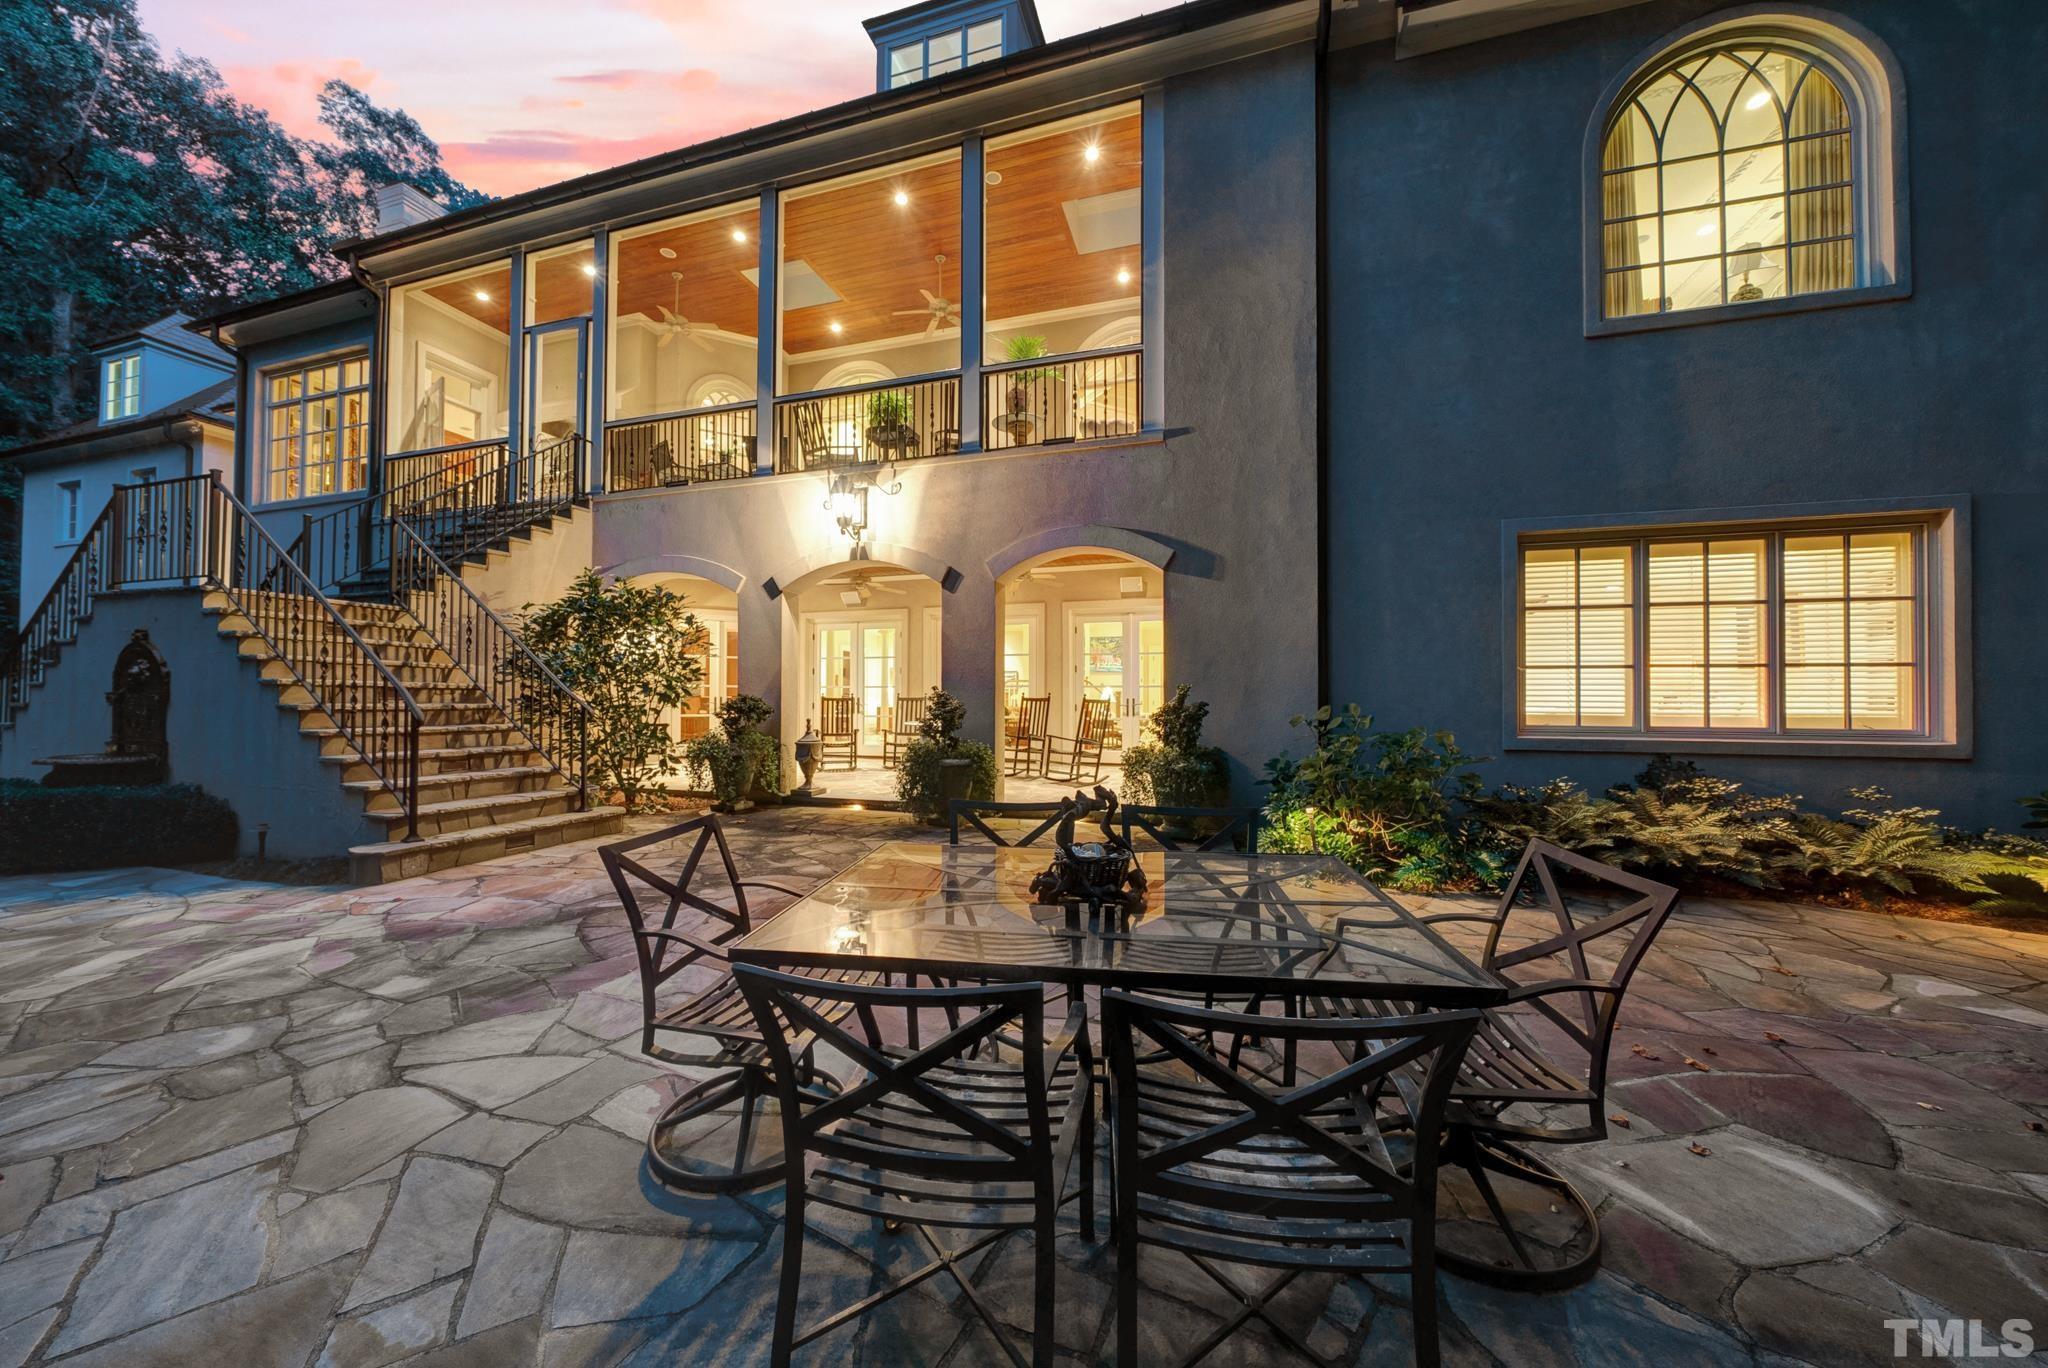 Stone patio overlooking beautiful waterfall. Entertain under covered porch area, with entrance to bar, theater room, and in law or nanny suite.